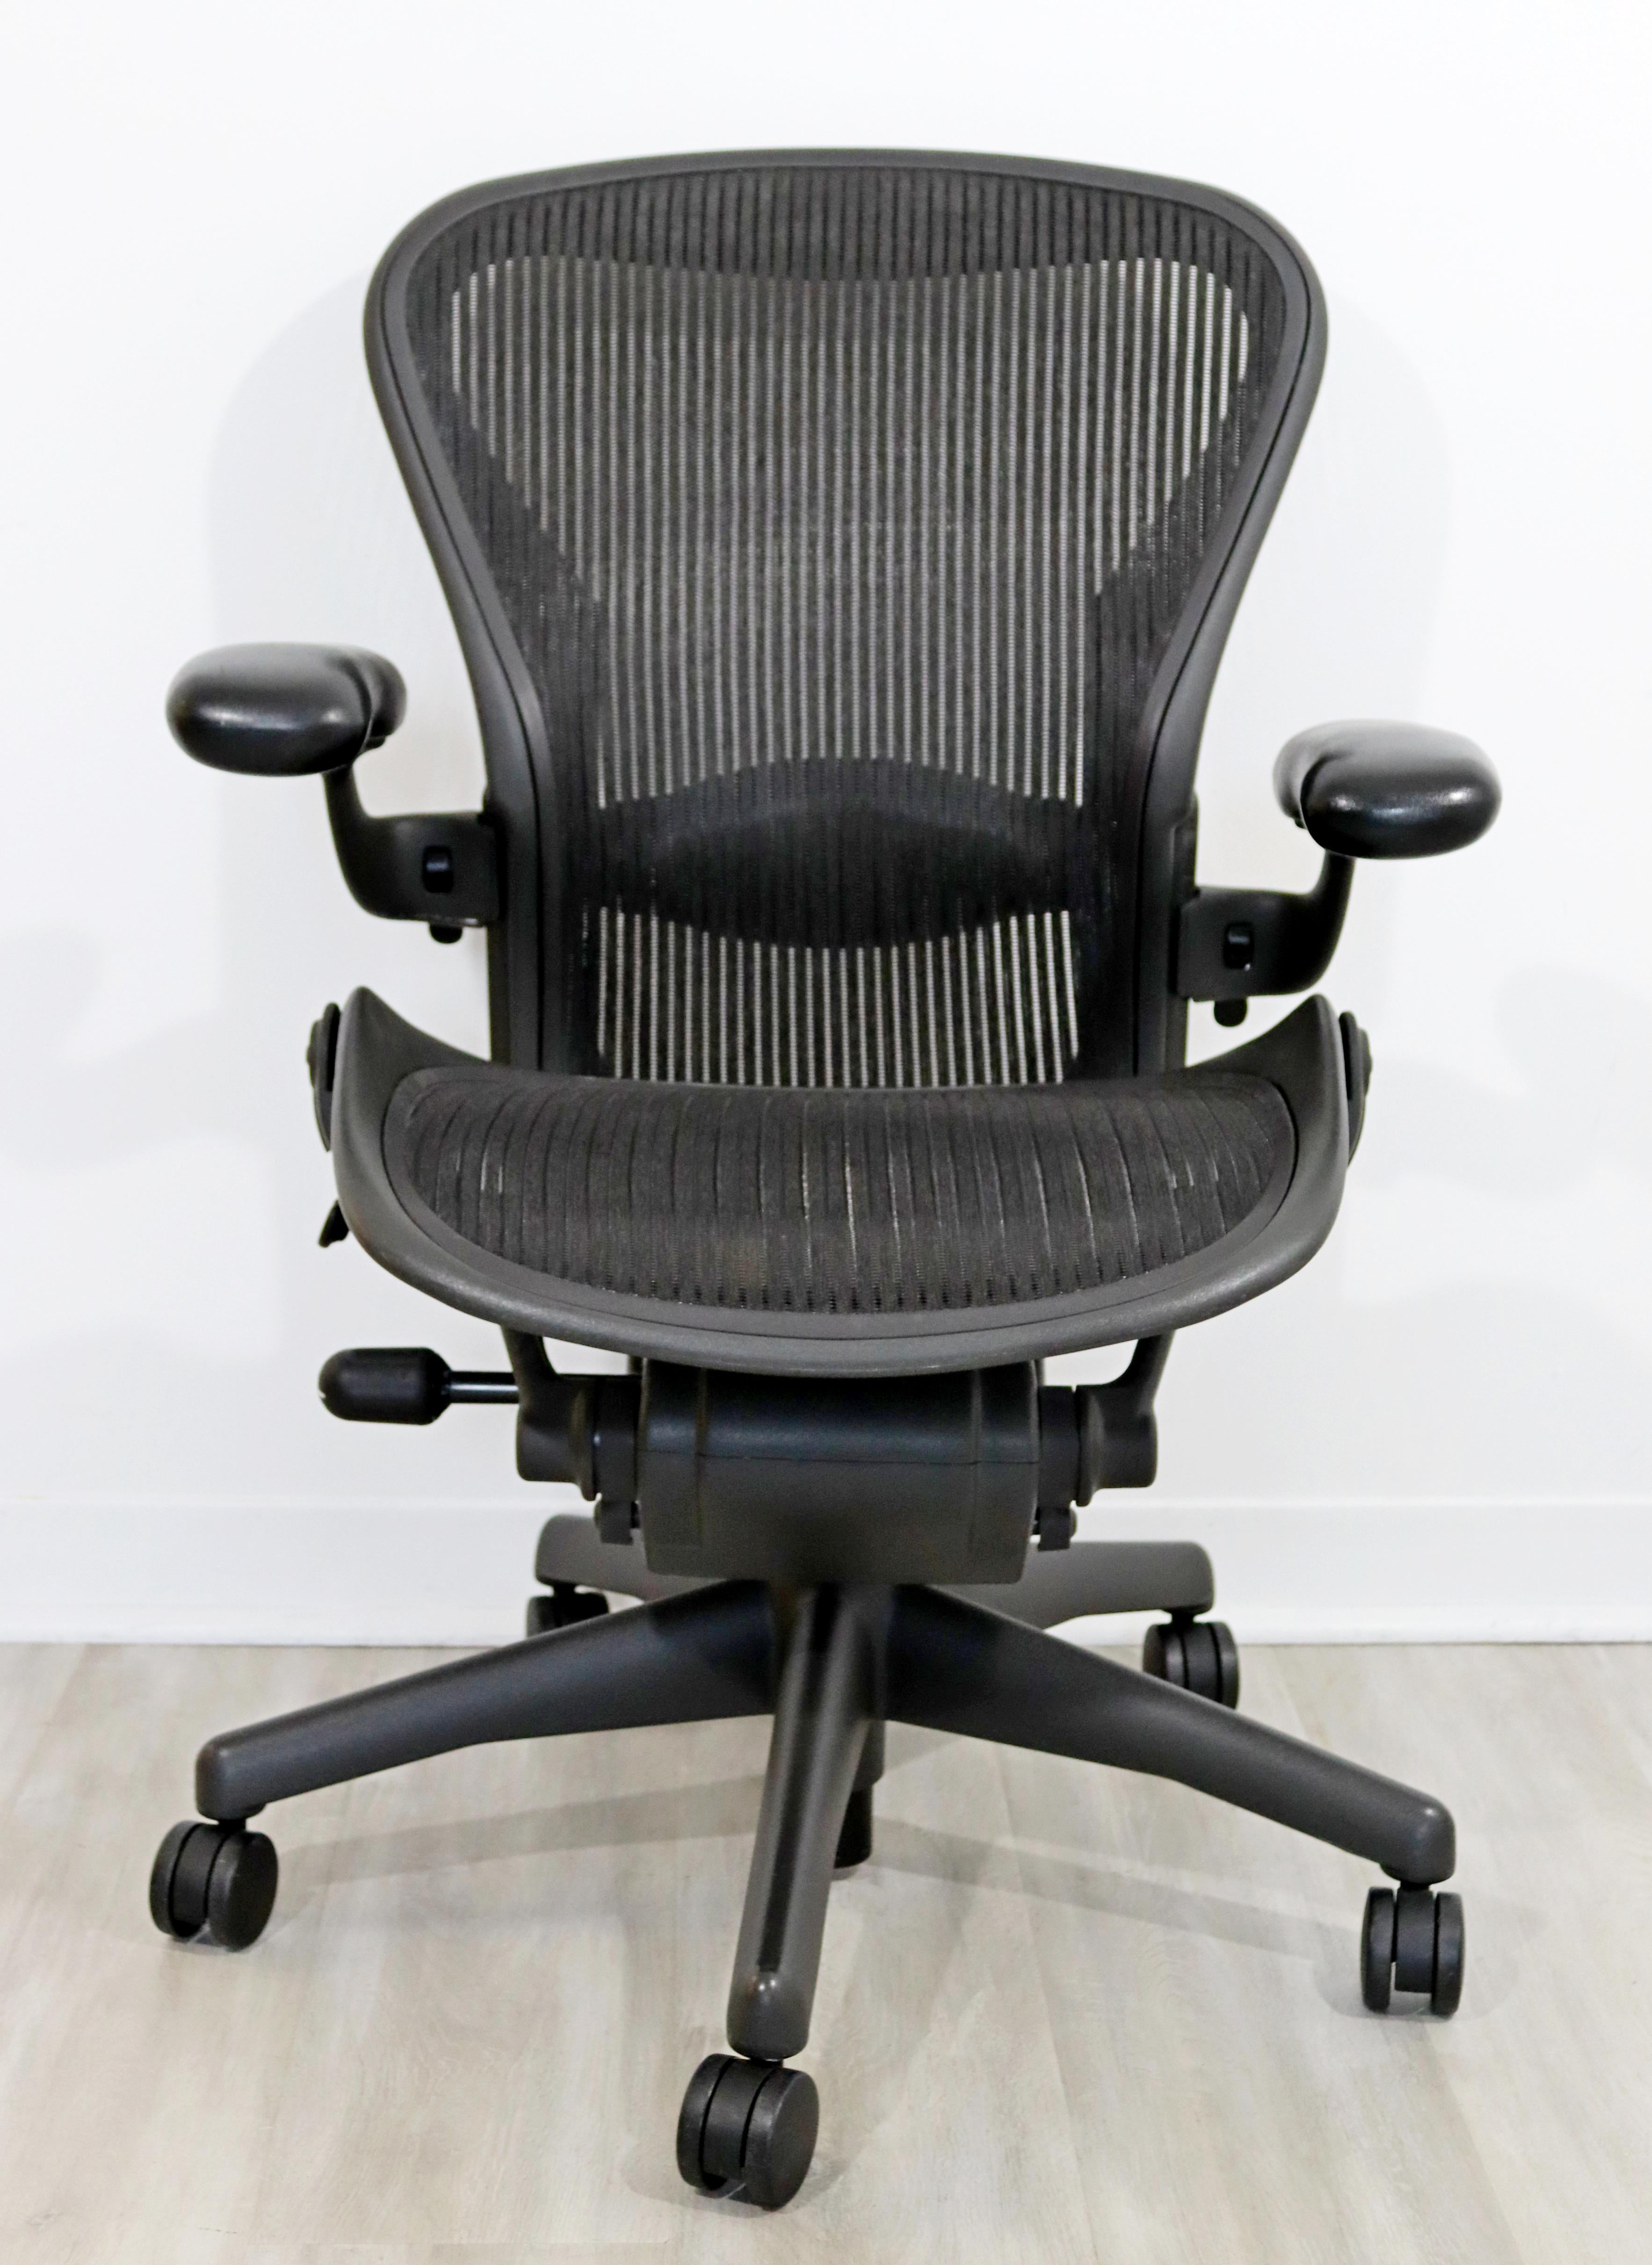 For your consideration is a fantastic rolling office chair, Aeron by Herman Miller, circa 1998. In excellent condition. The dimensions are 26